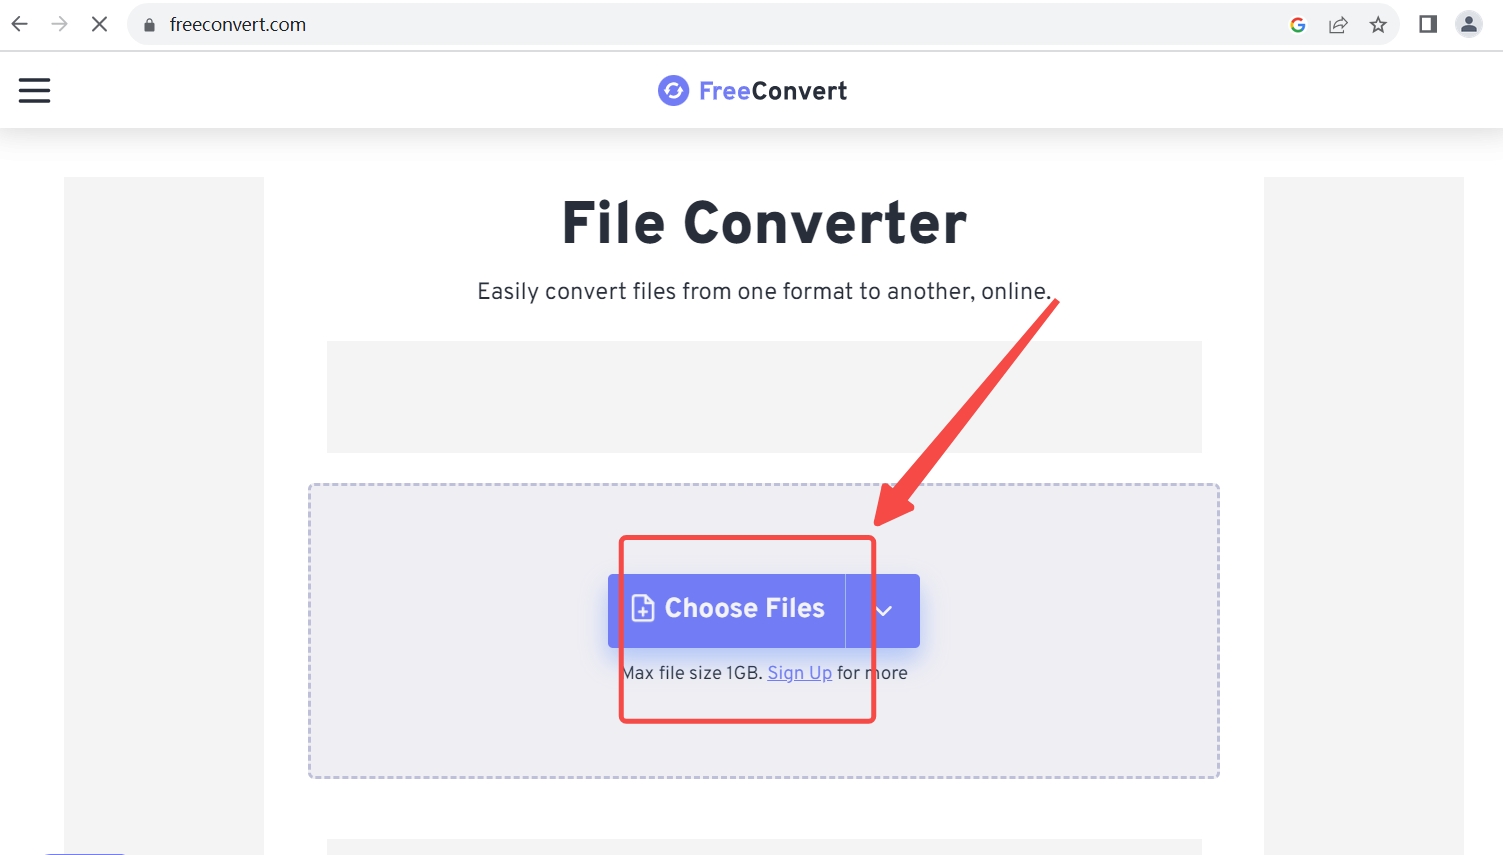 Choose the video file and upload it to FreeConvert